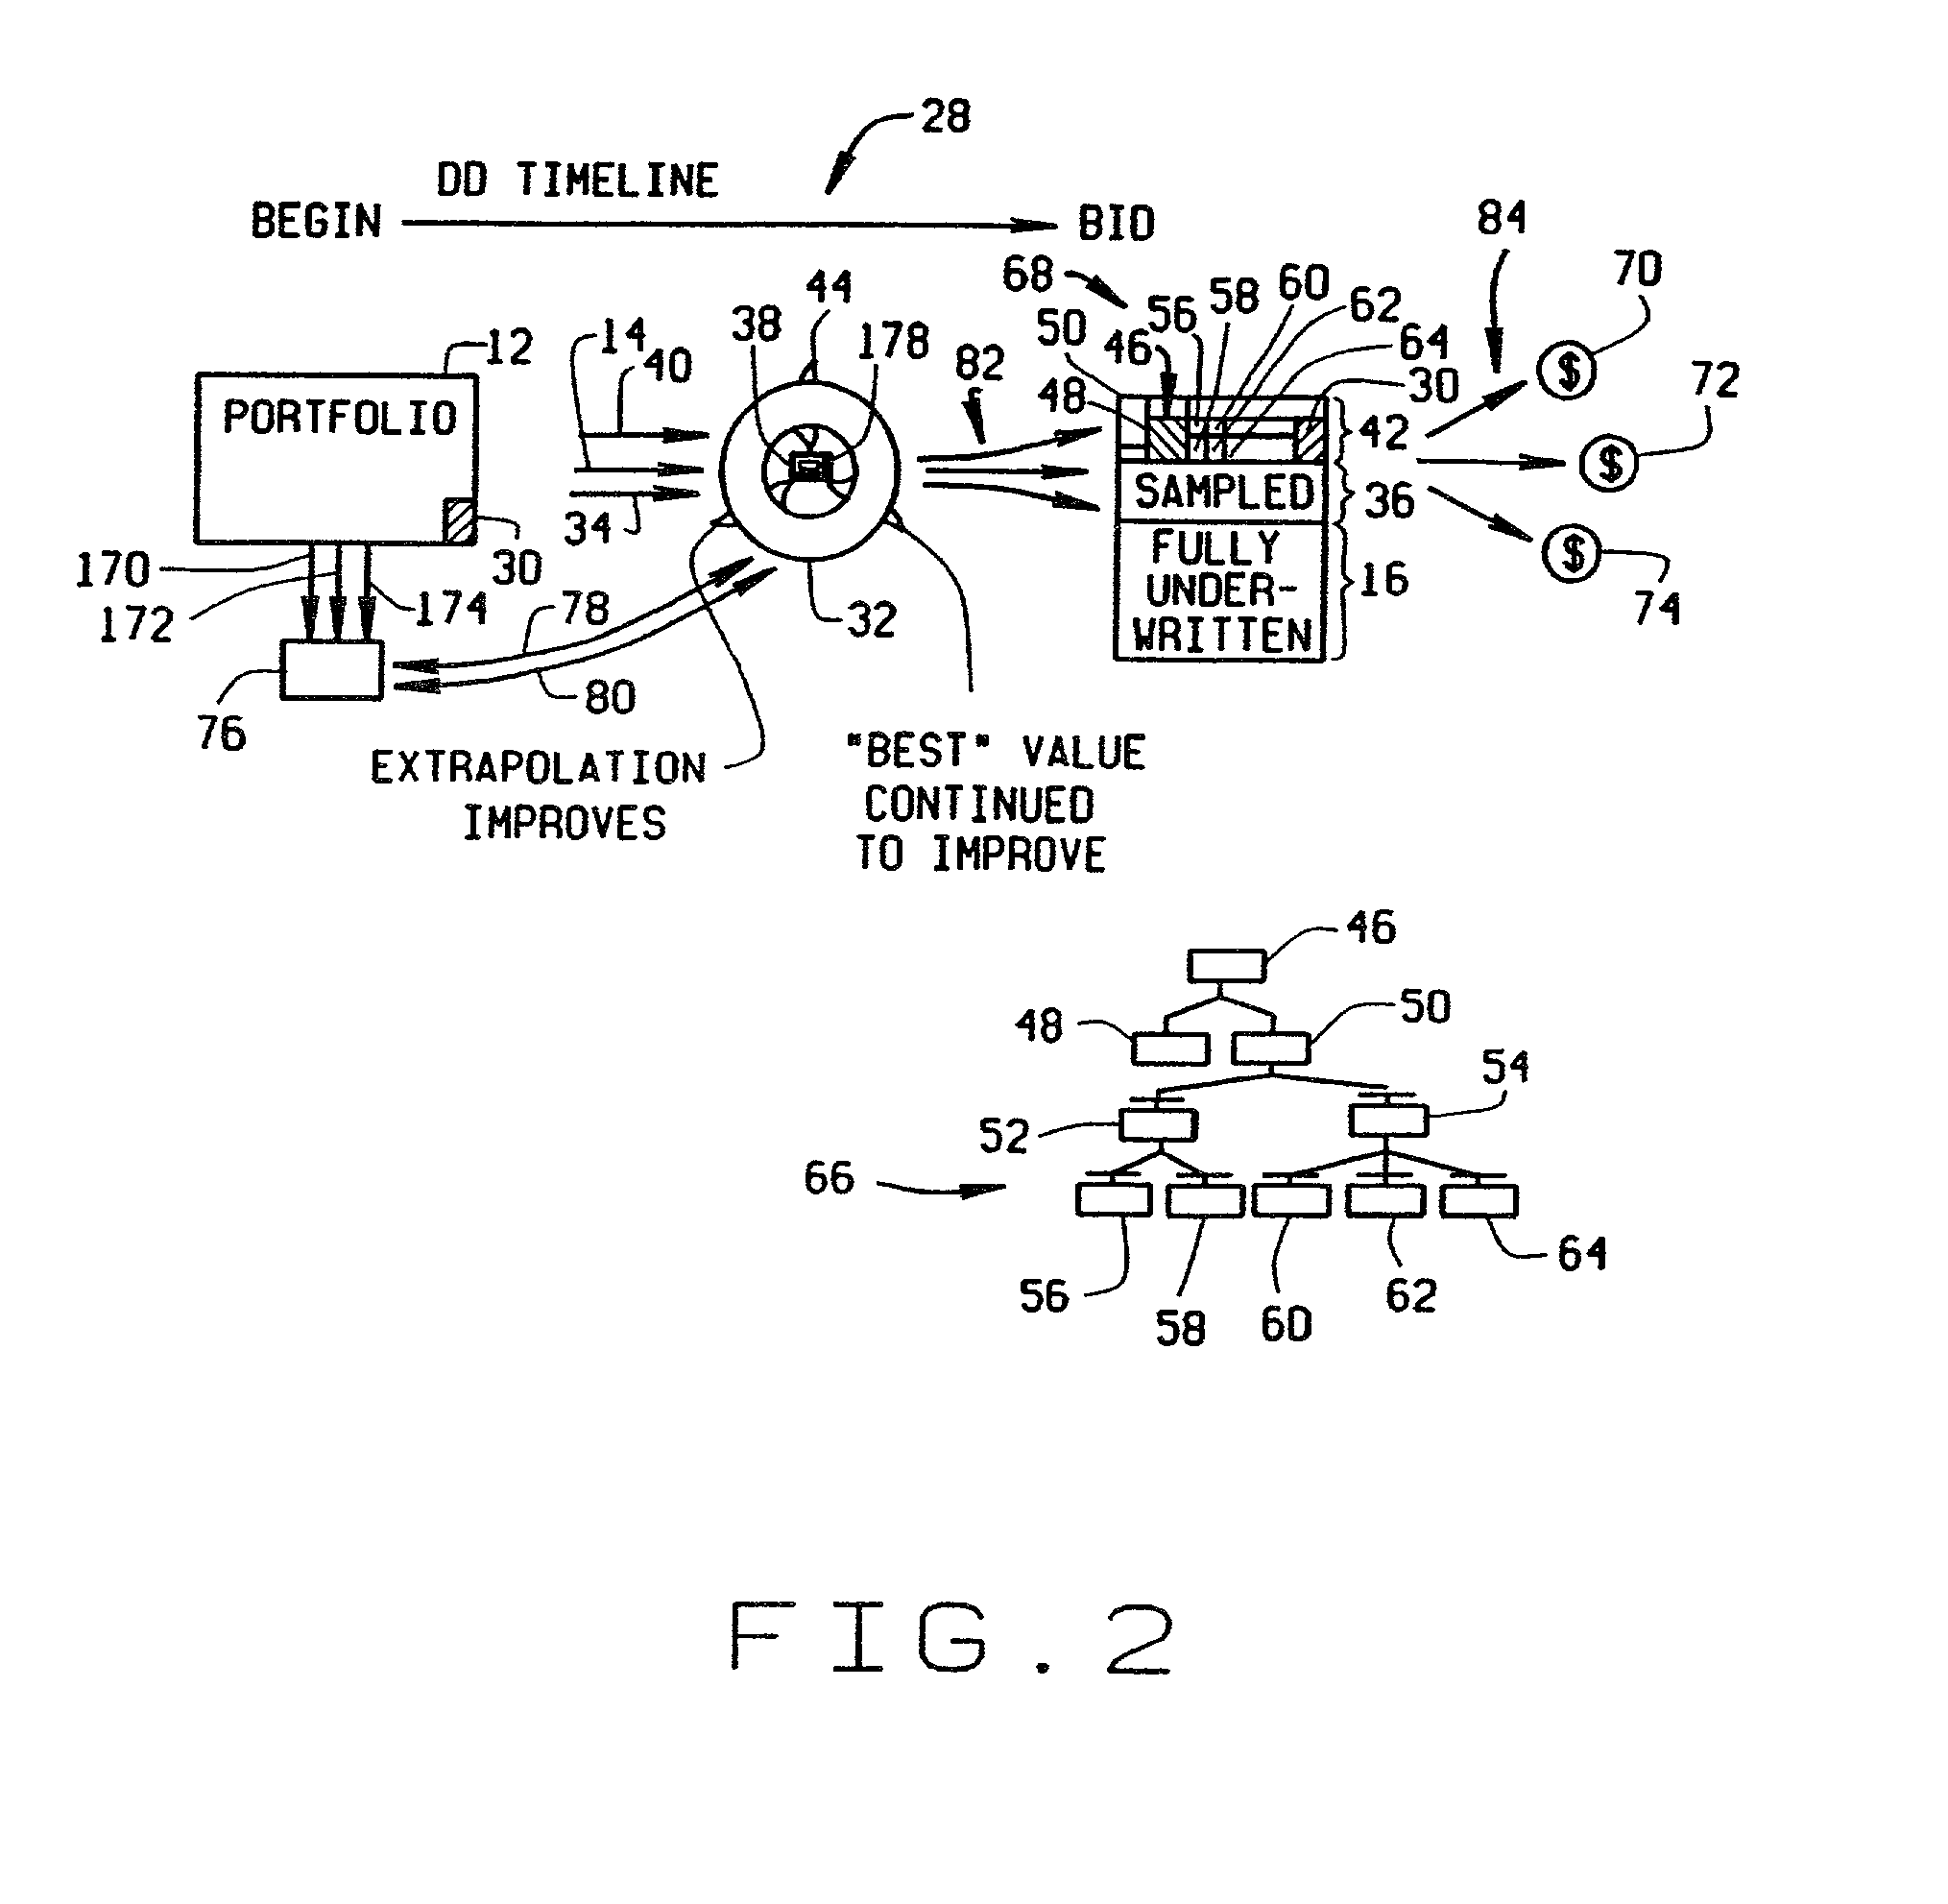 Methods and systems for efficiently sampling portfolios for optimal underwriting